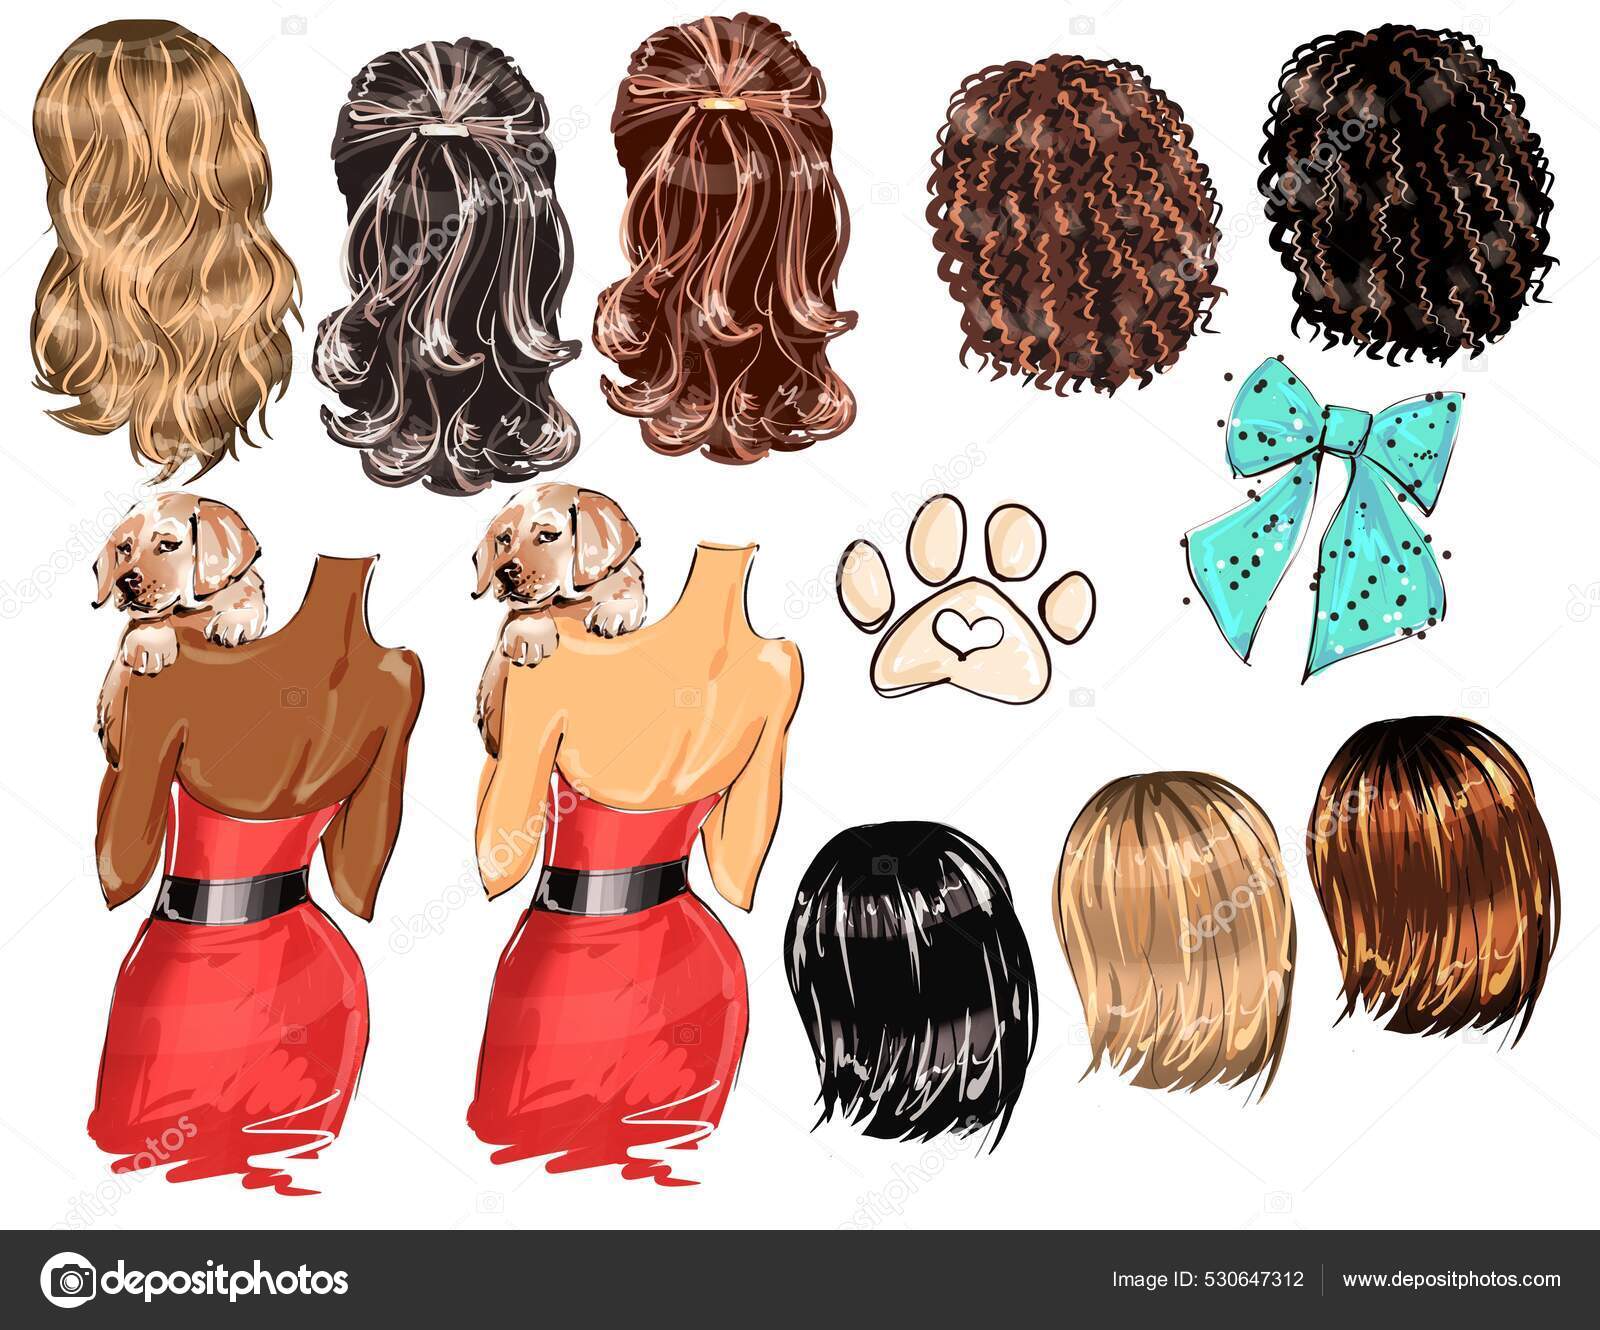 36 Zodiac Signs Hairstyle Ideas to Try in 2023 - Hood MWR